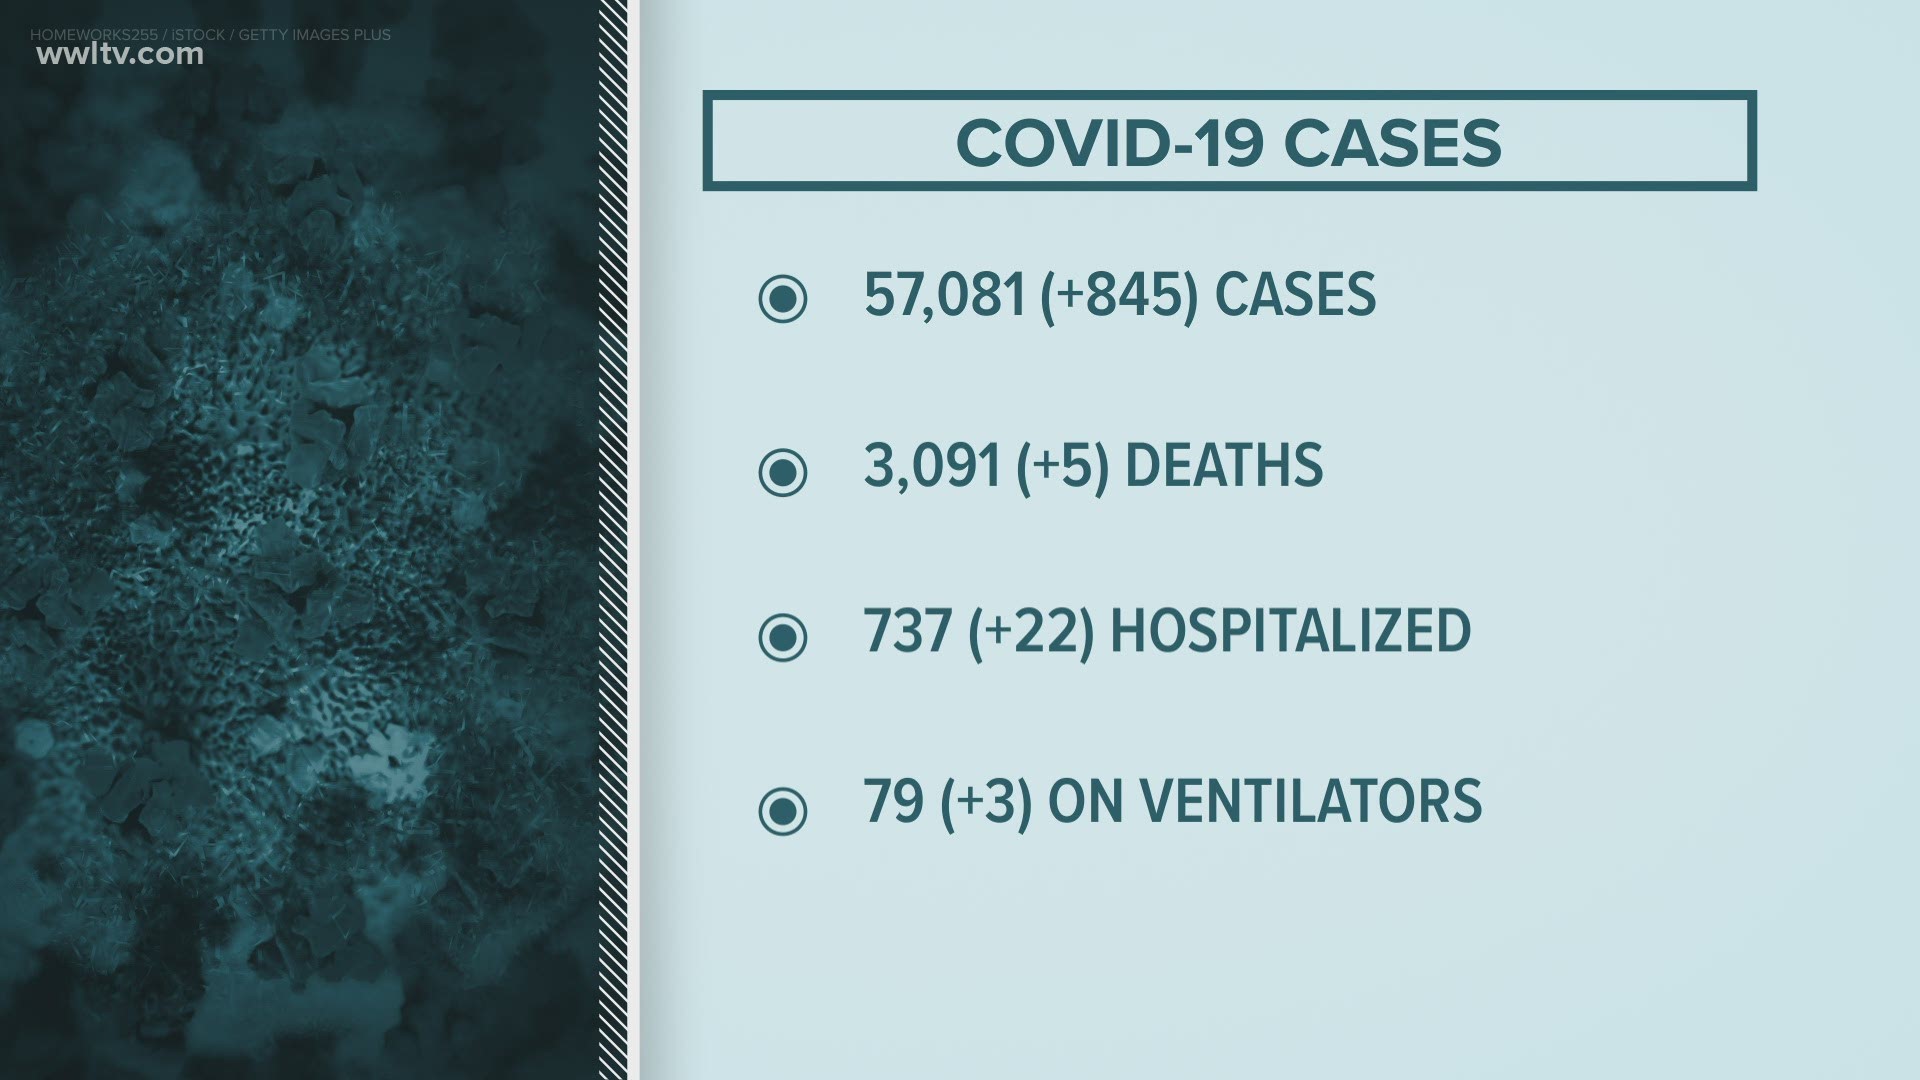 There was a 22-patient increase in COVID-19 hospitalizations in Louisiana on June 29.